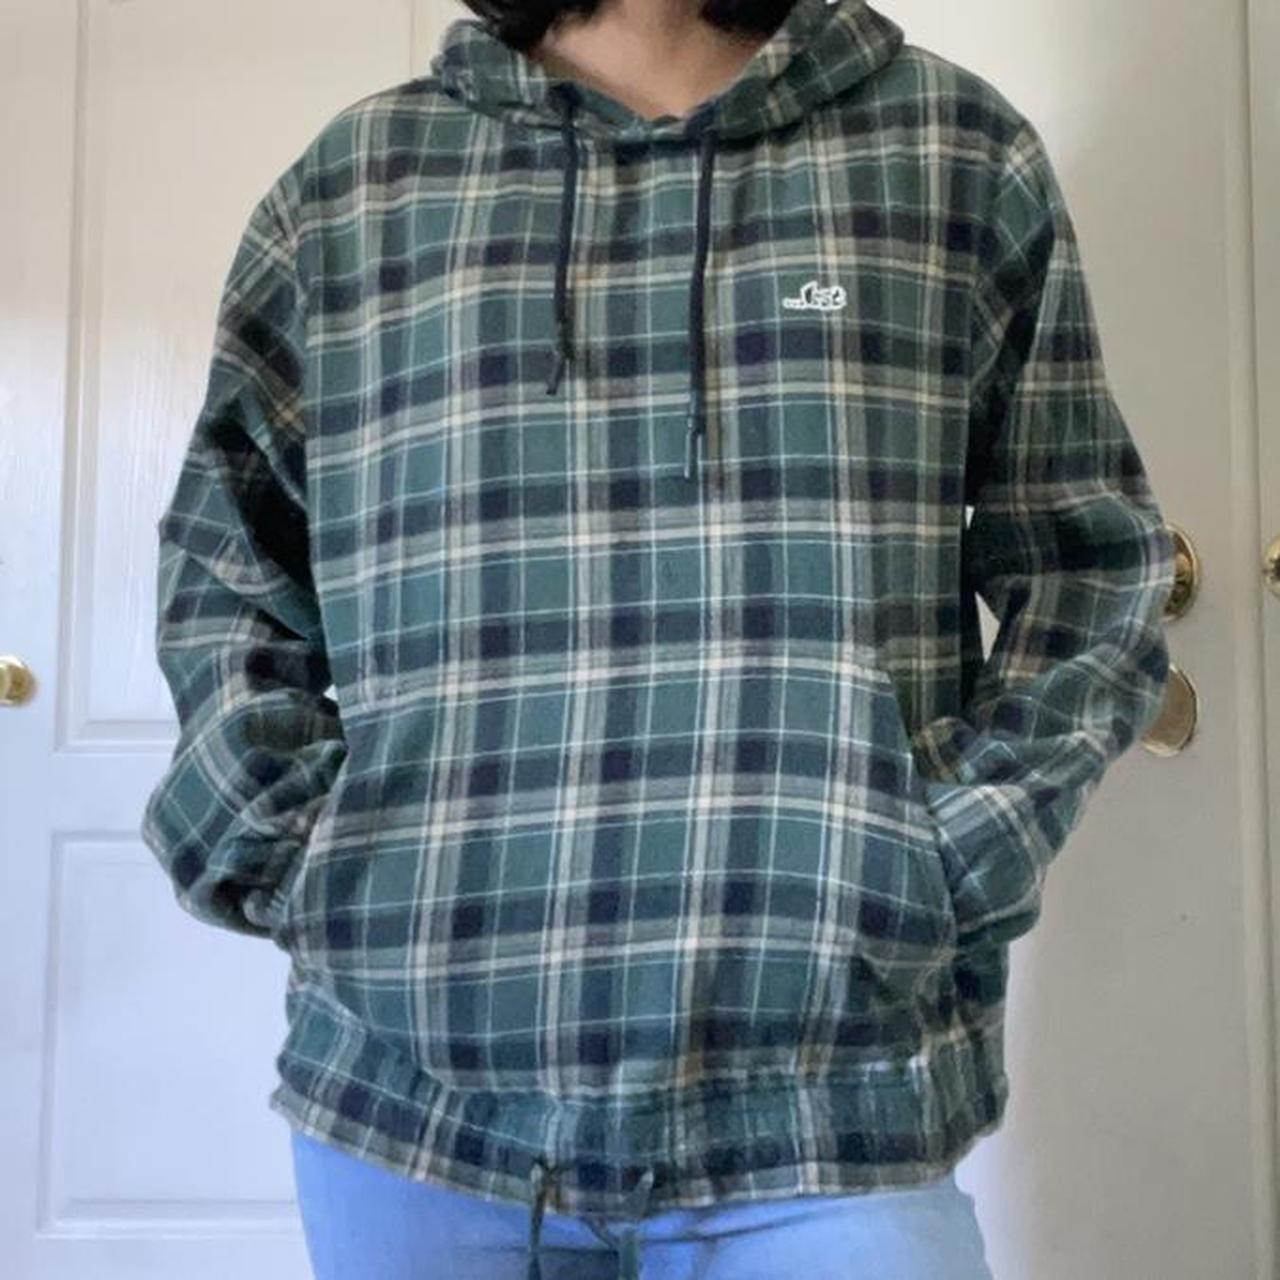 Product Image 2 - LOST skater brand green plaid